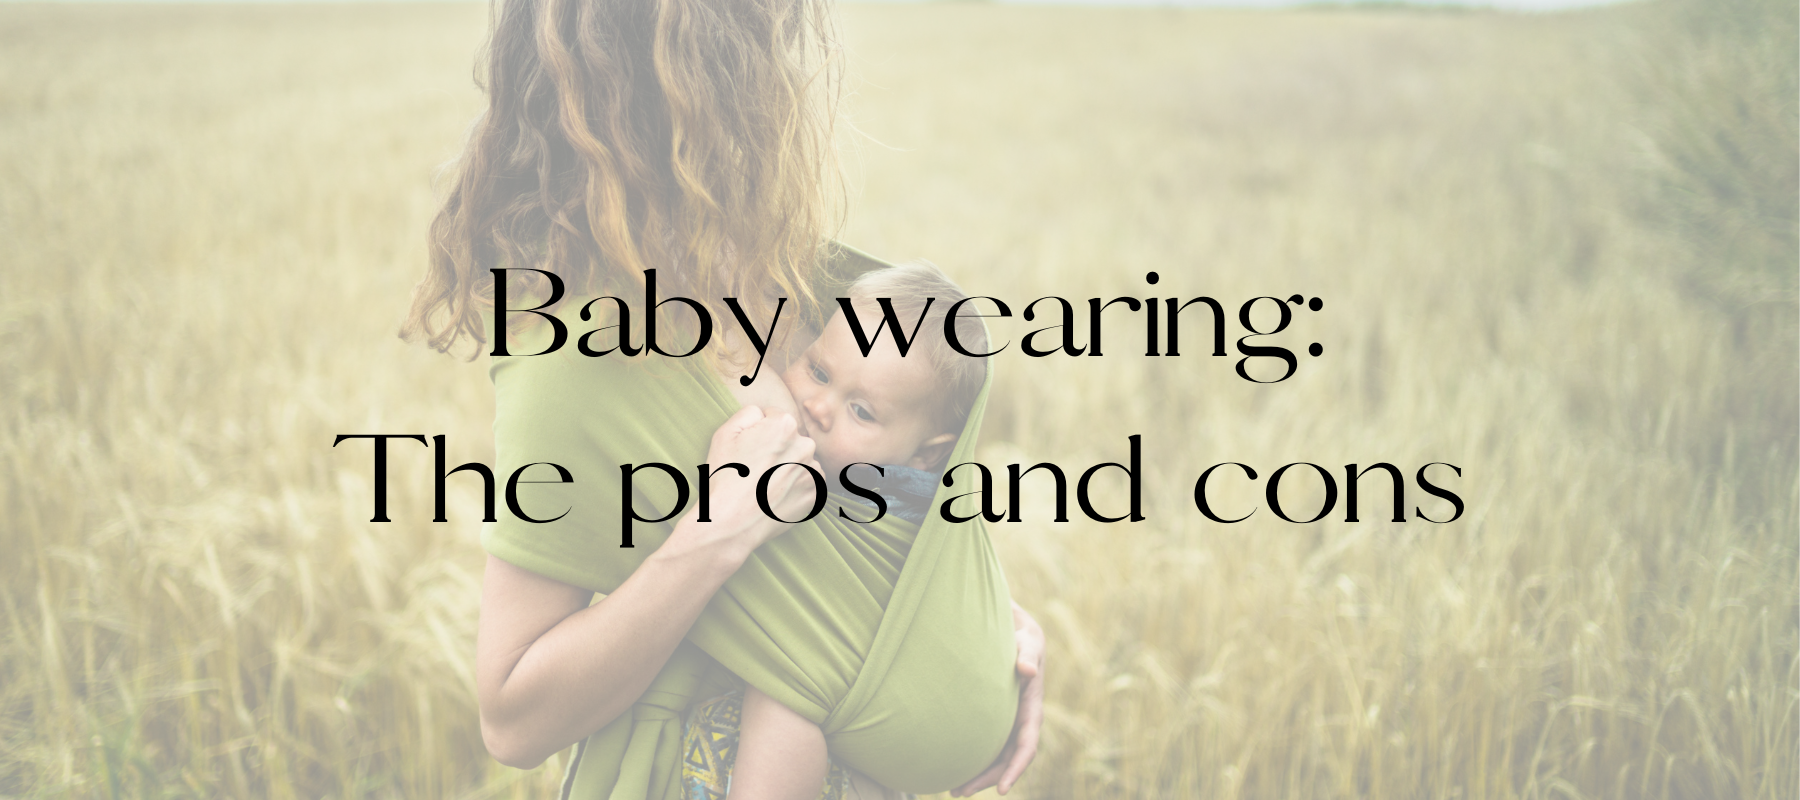 Baby wearing - The pros and cons